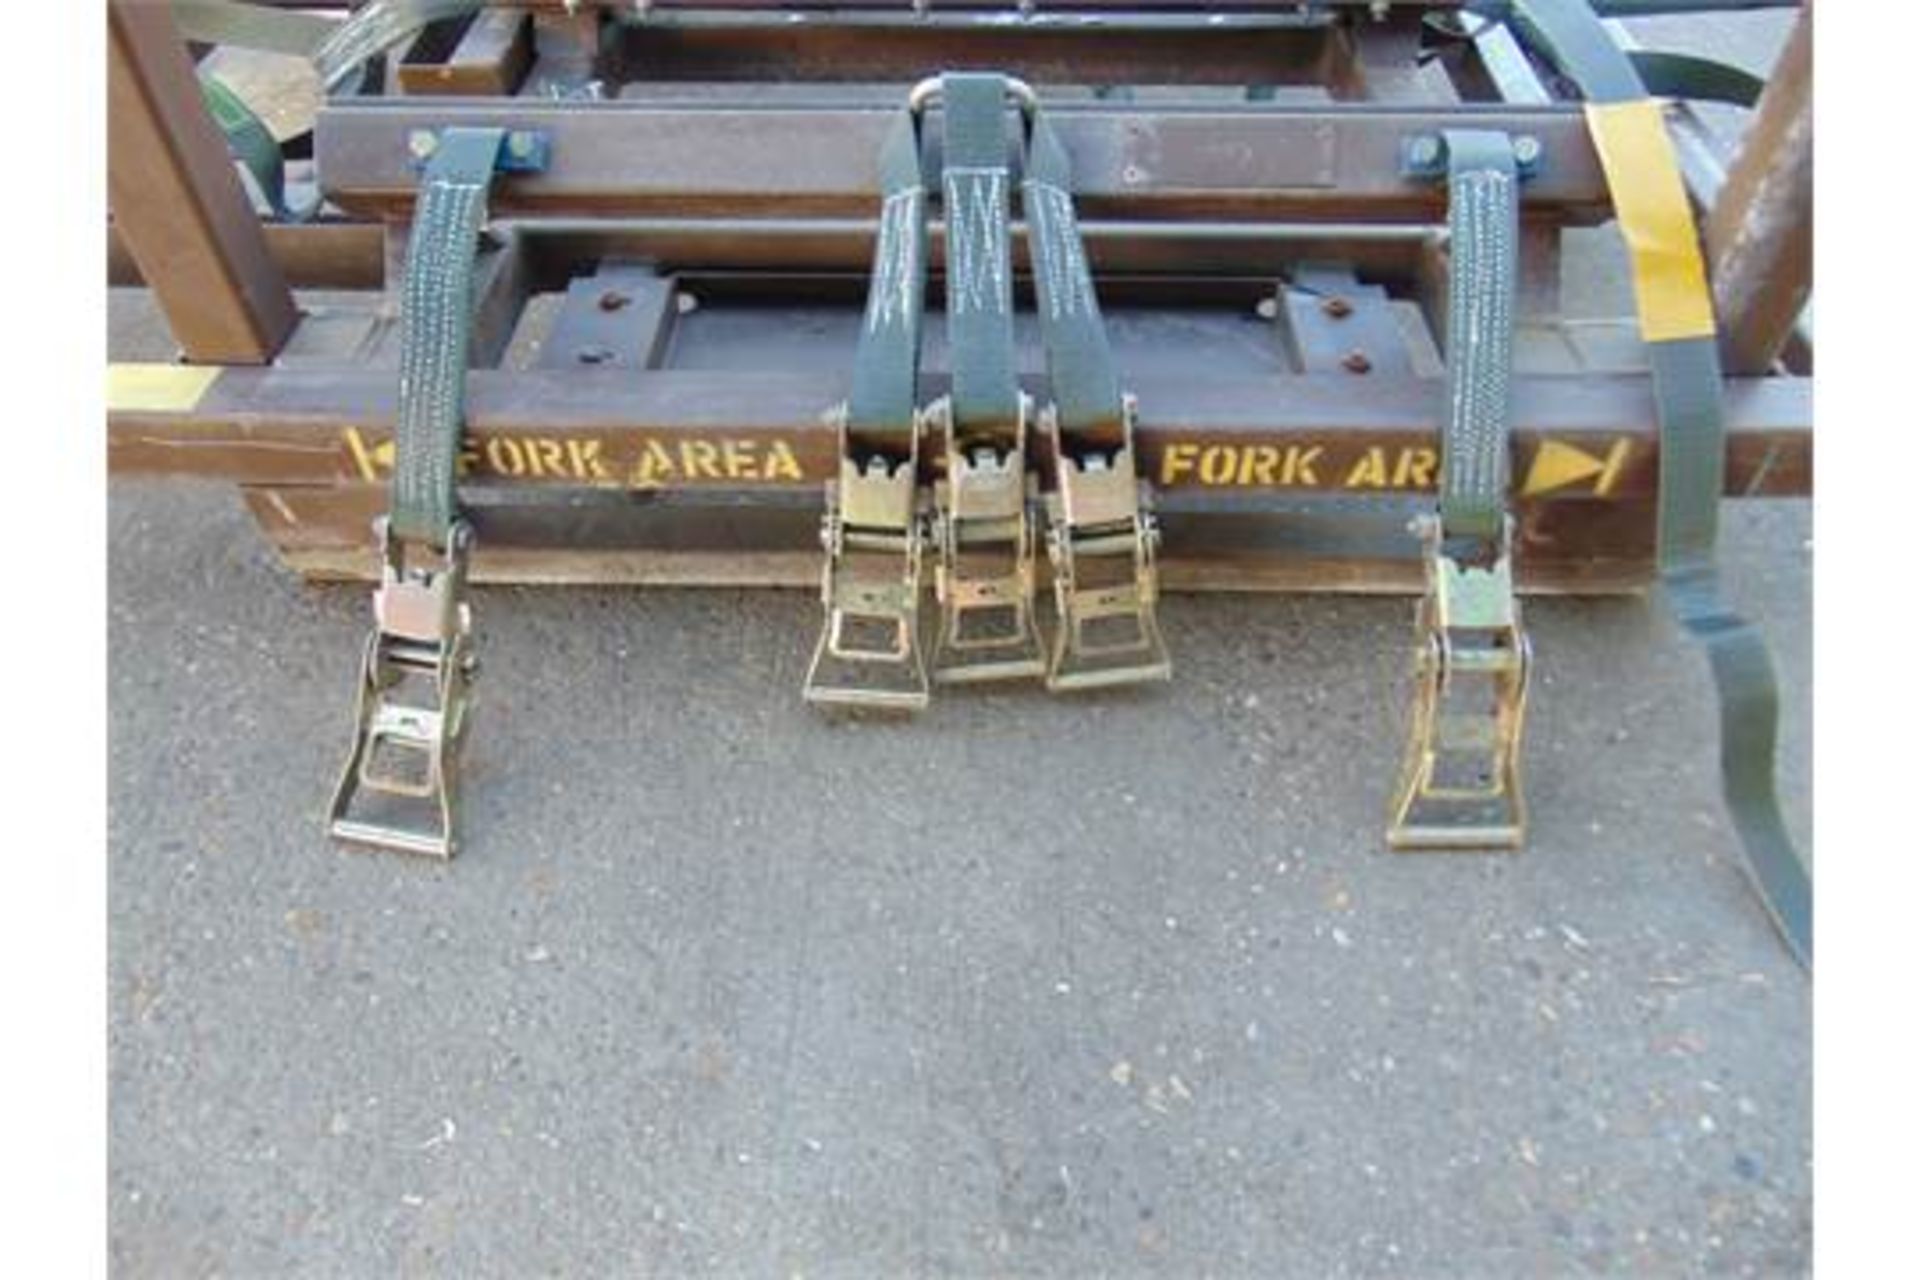 2 x A1047 Mk 3 Stacking Armament / Bomb Pallets with Webbing - Image 6 of 10